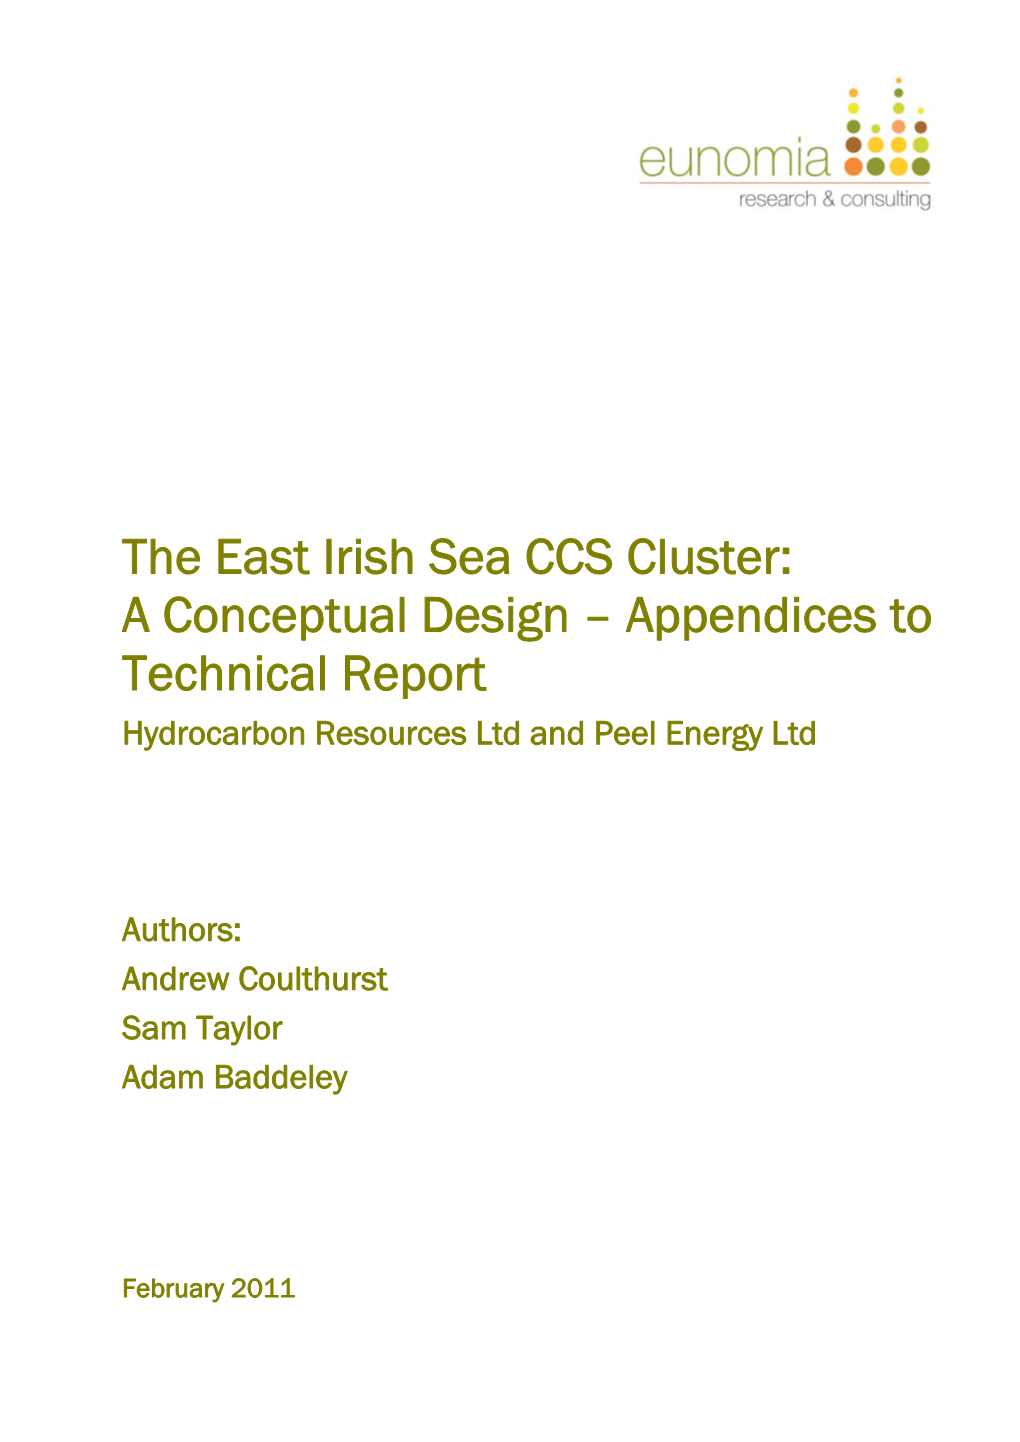 The East Irish Sea CCS Cluster: a Conceptual Design – Appendices to Technical Report Hydrocarbon Resources Ltd and Peel Energy Ltd